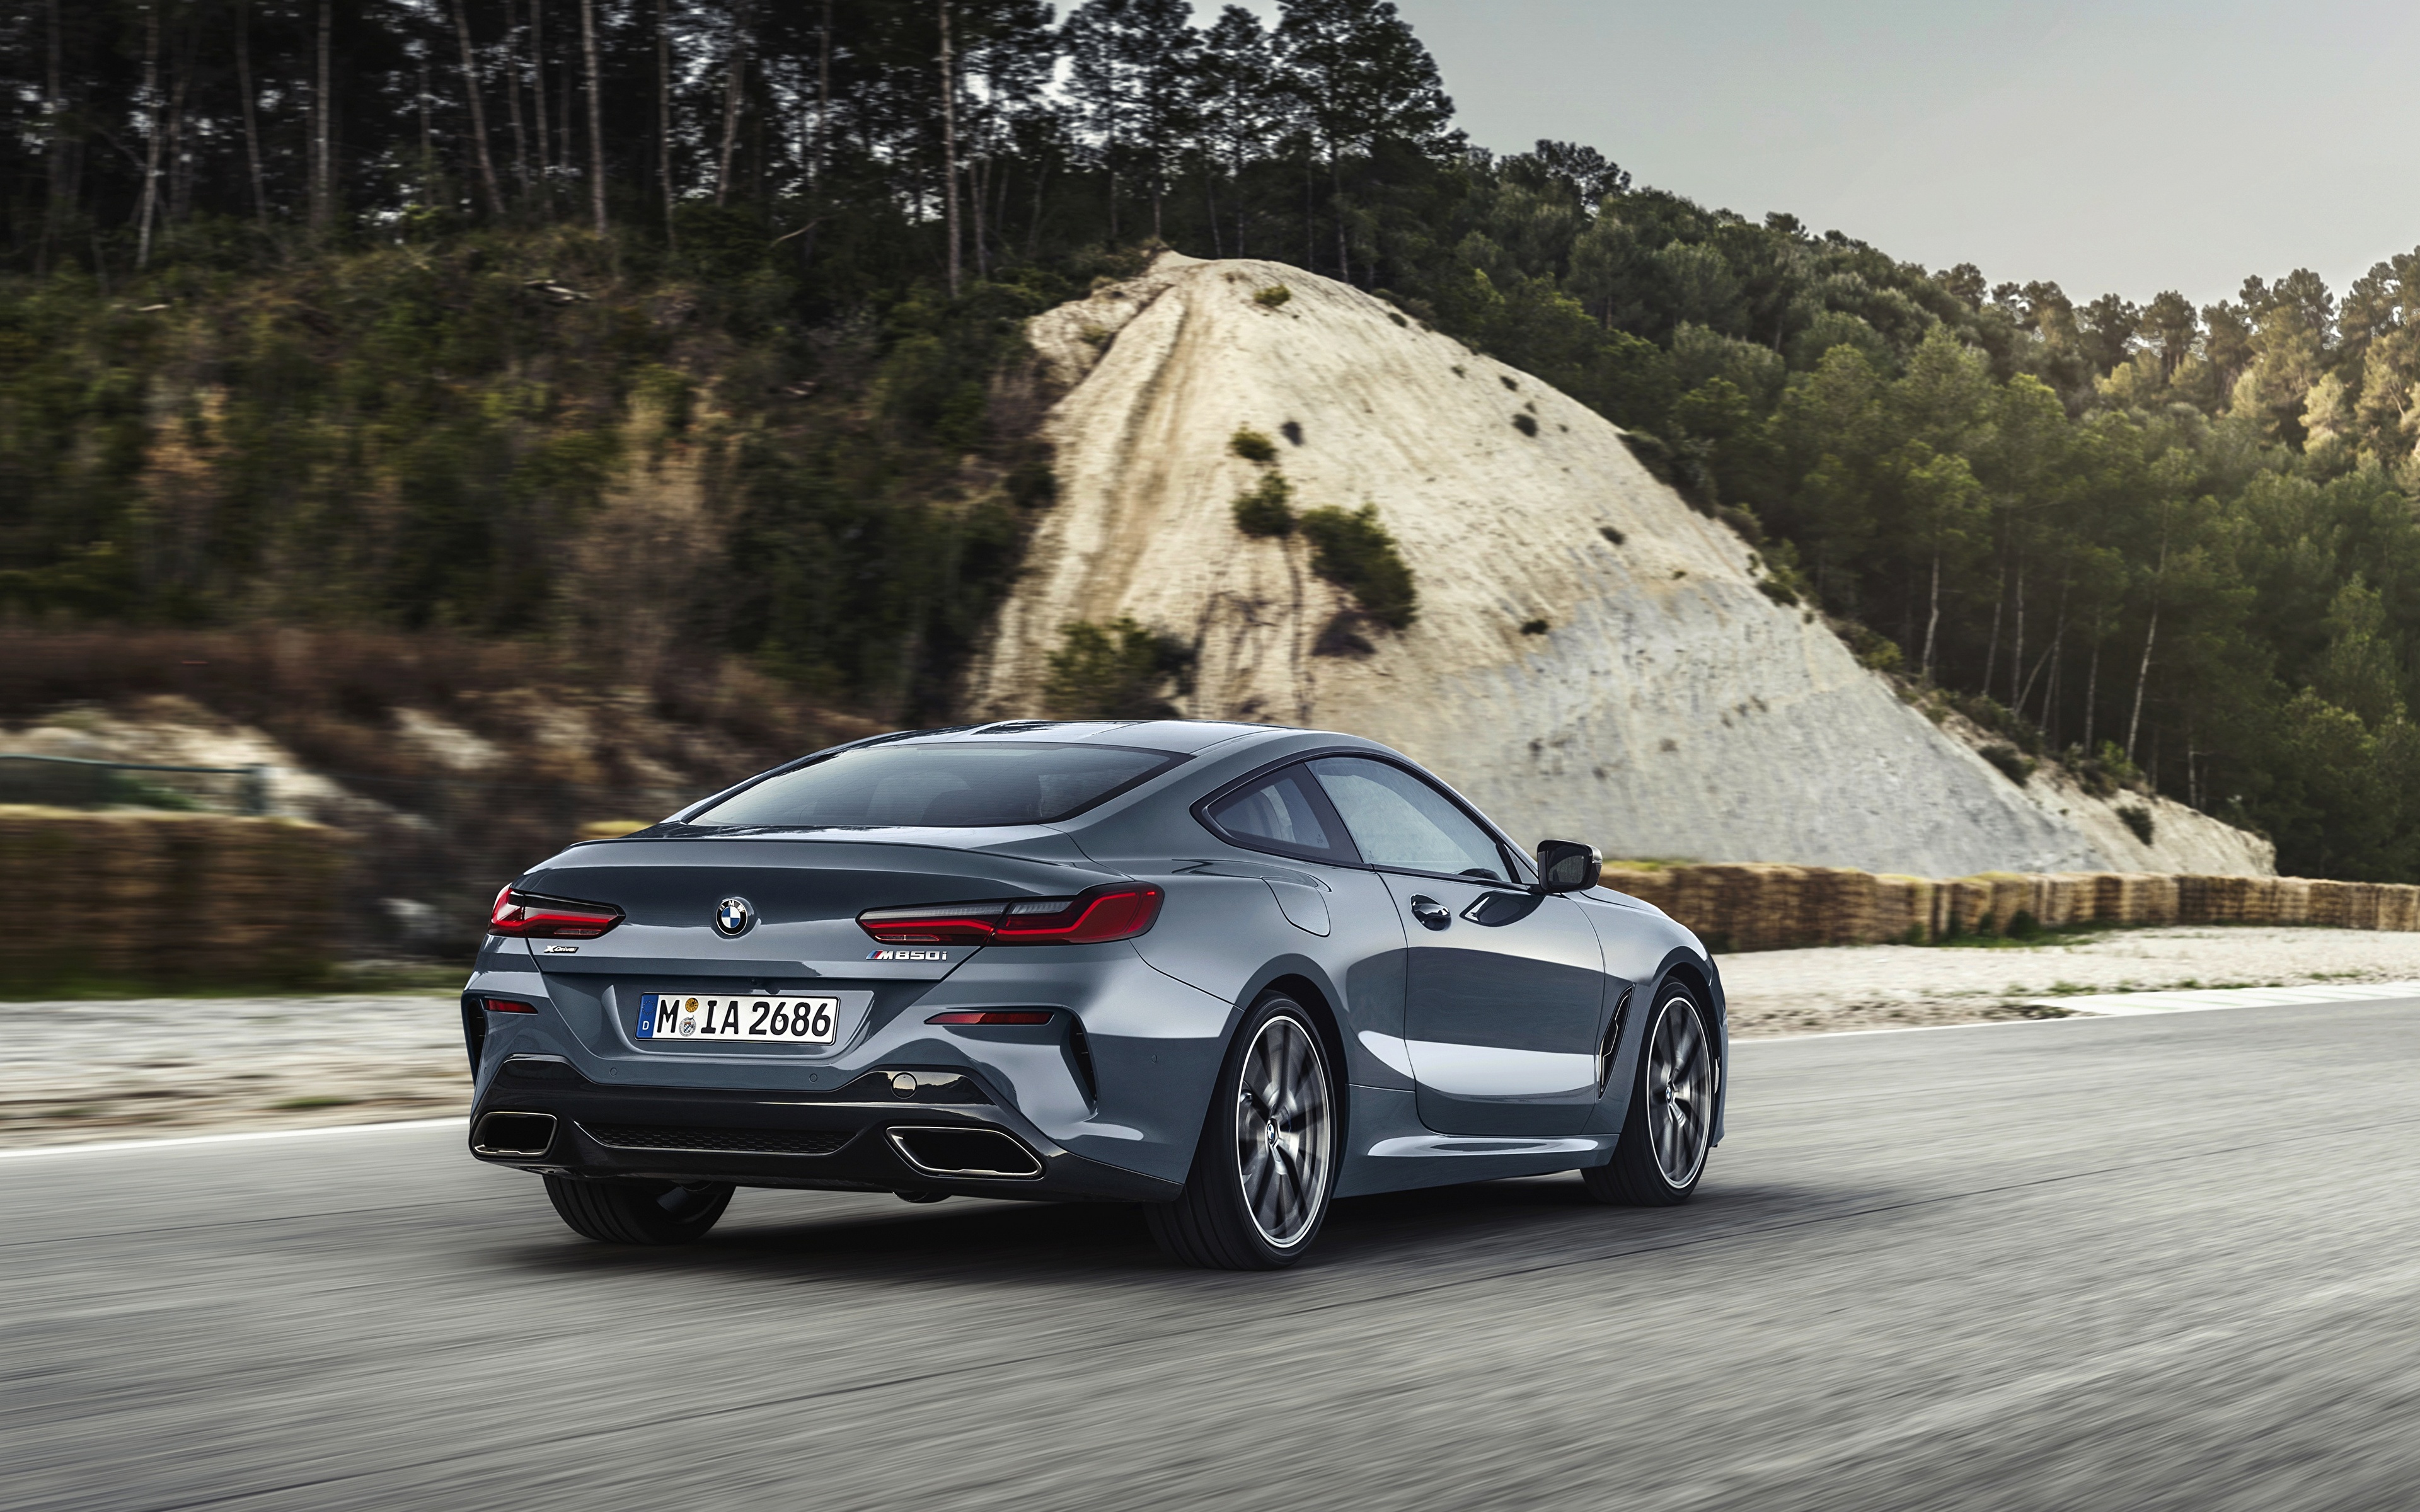 BMW 8 Series Coupe (G15) best photo